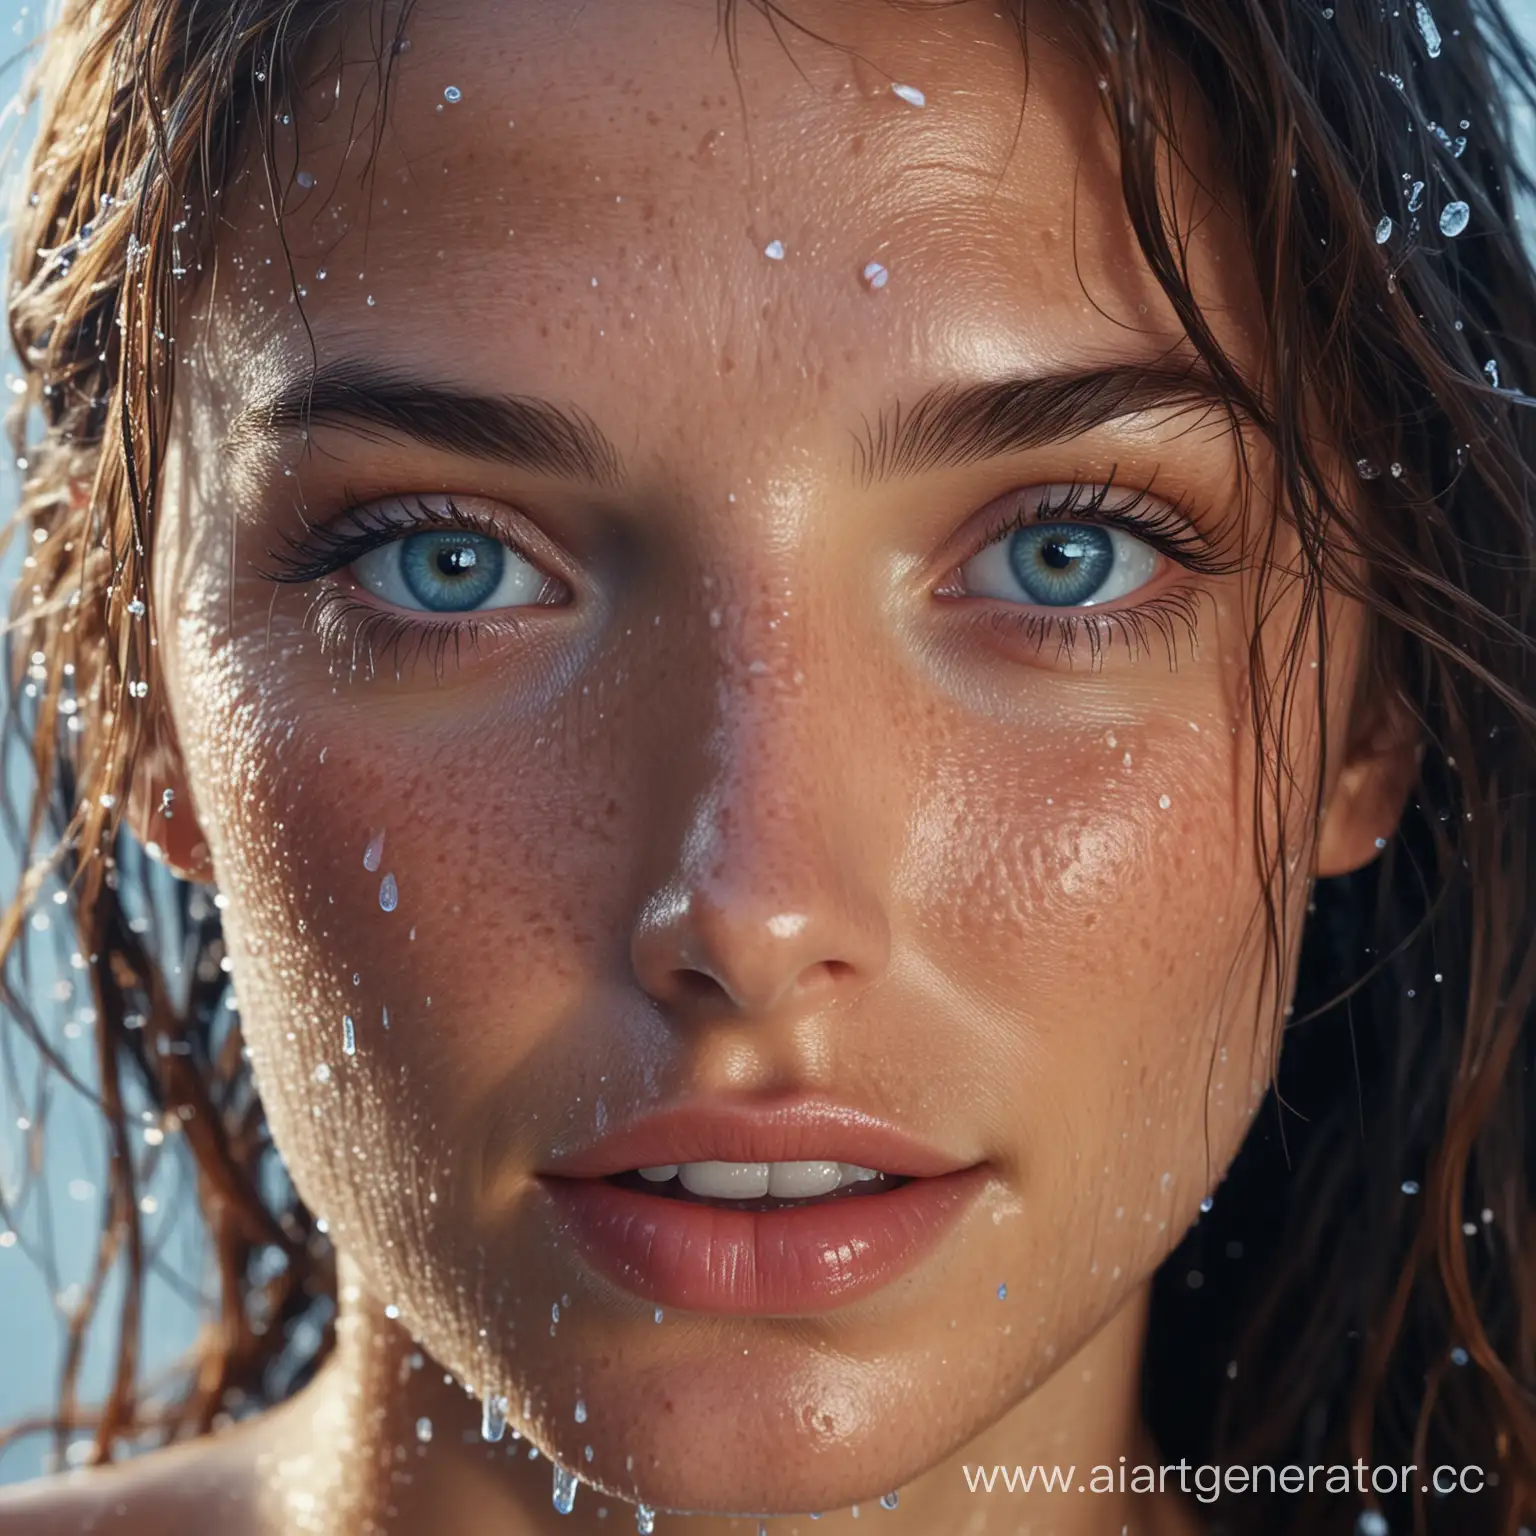 Mesmerizing-Freckled-Woman-with-Wet-Hair-and-Icy-Driplets-in-Photorealistic-CloseUp-Portrait